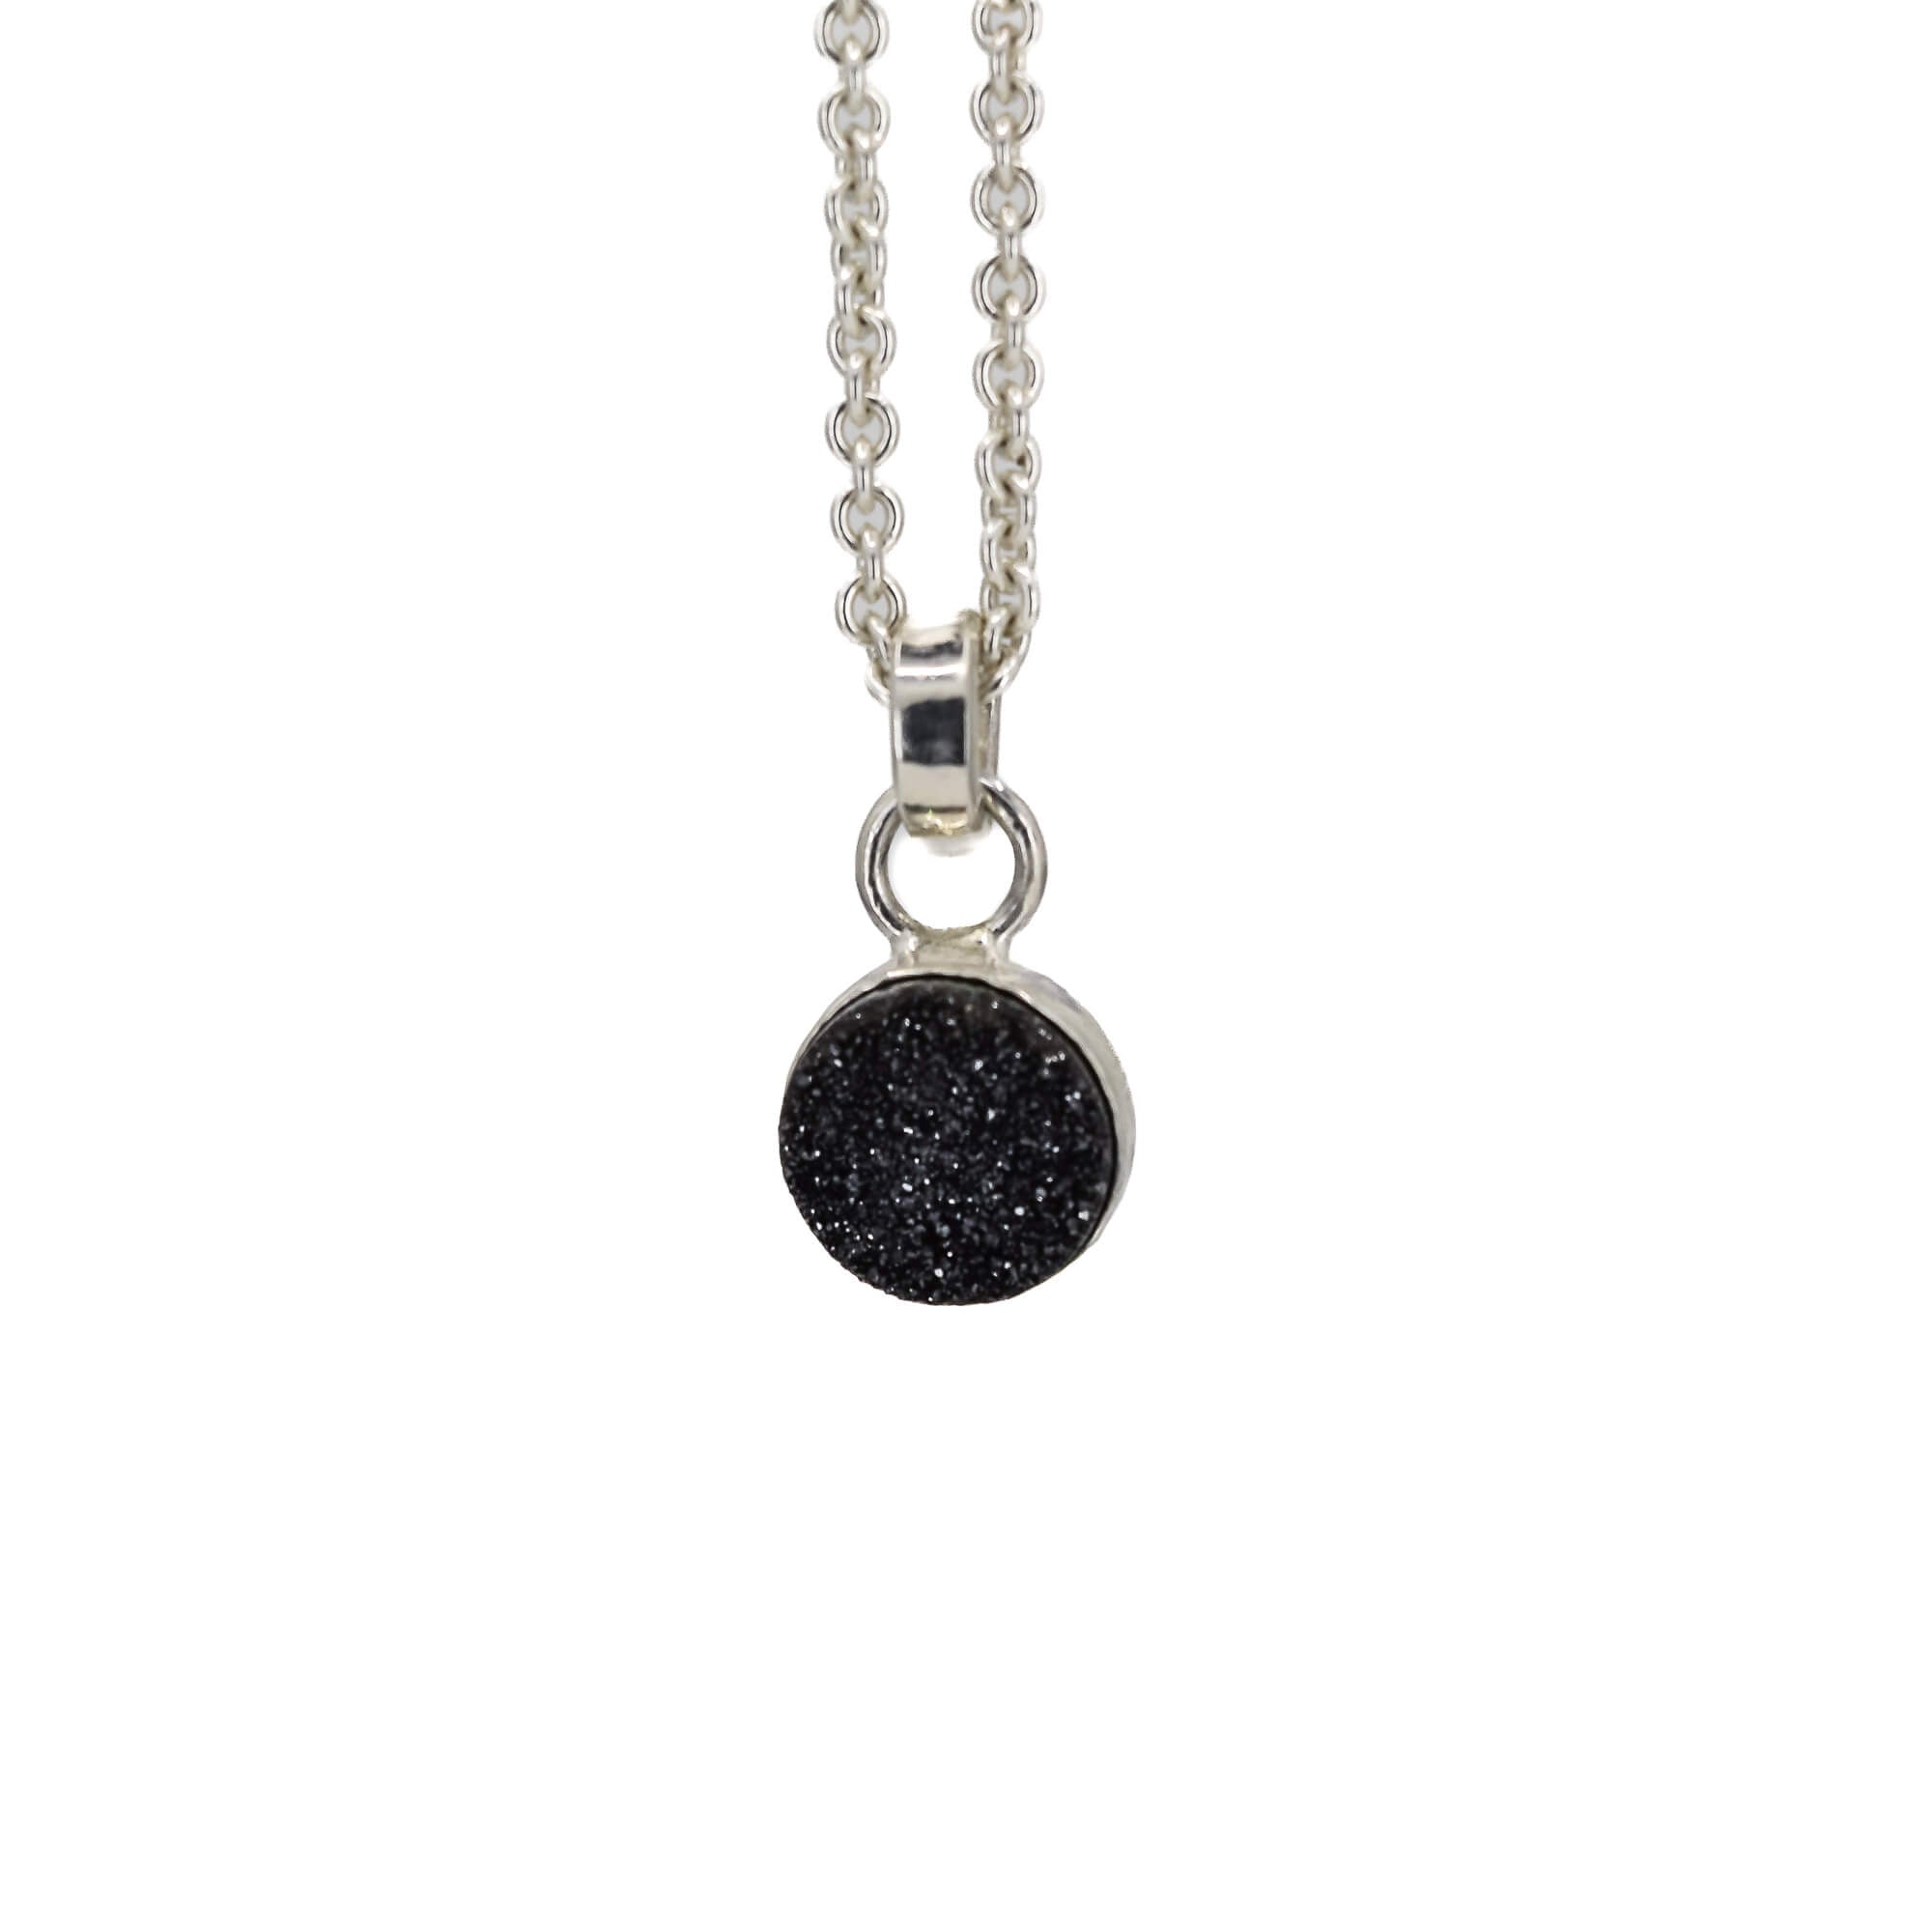 Small round black druzy pendant set in sterling silver hanging on a cable chain